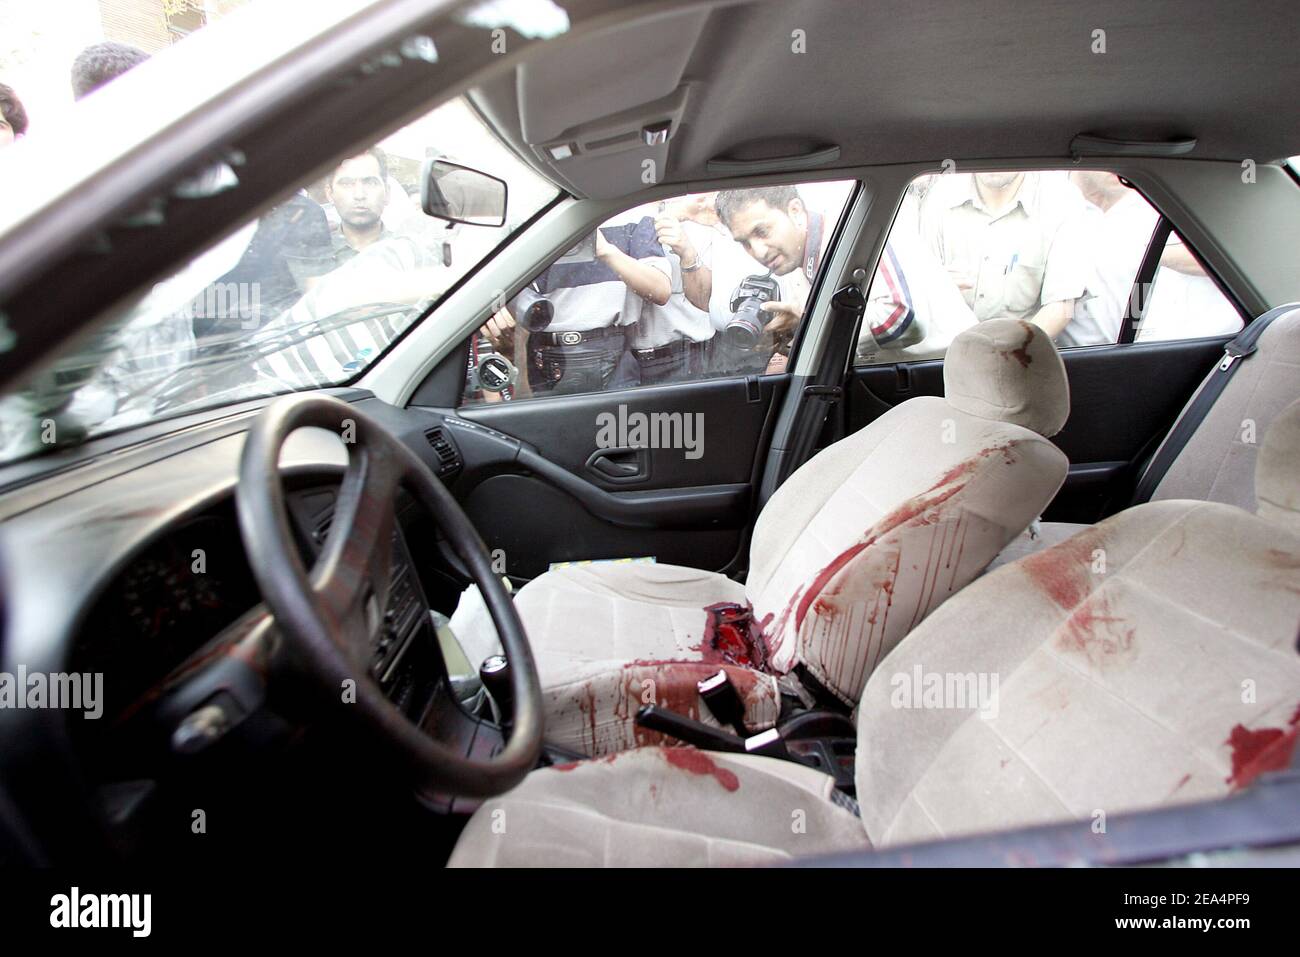 Picture shows the blood stained car of Iranian magistrate Massoud Moghaddas, after his assassination in Tehran, Iran, on August 2, 2005. Moghaddas, who has given verdicts in high-profile political cases, including that of jailed dissident Akbar Ganji, was murdered in broad daylight on a Tehran street. Photo by ABACAPRESS.COM. Stock Photo